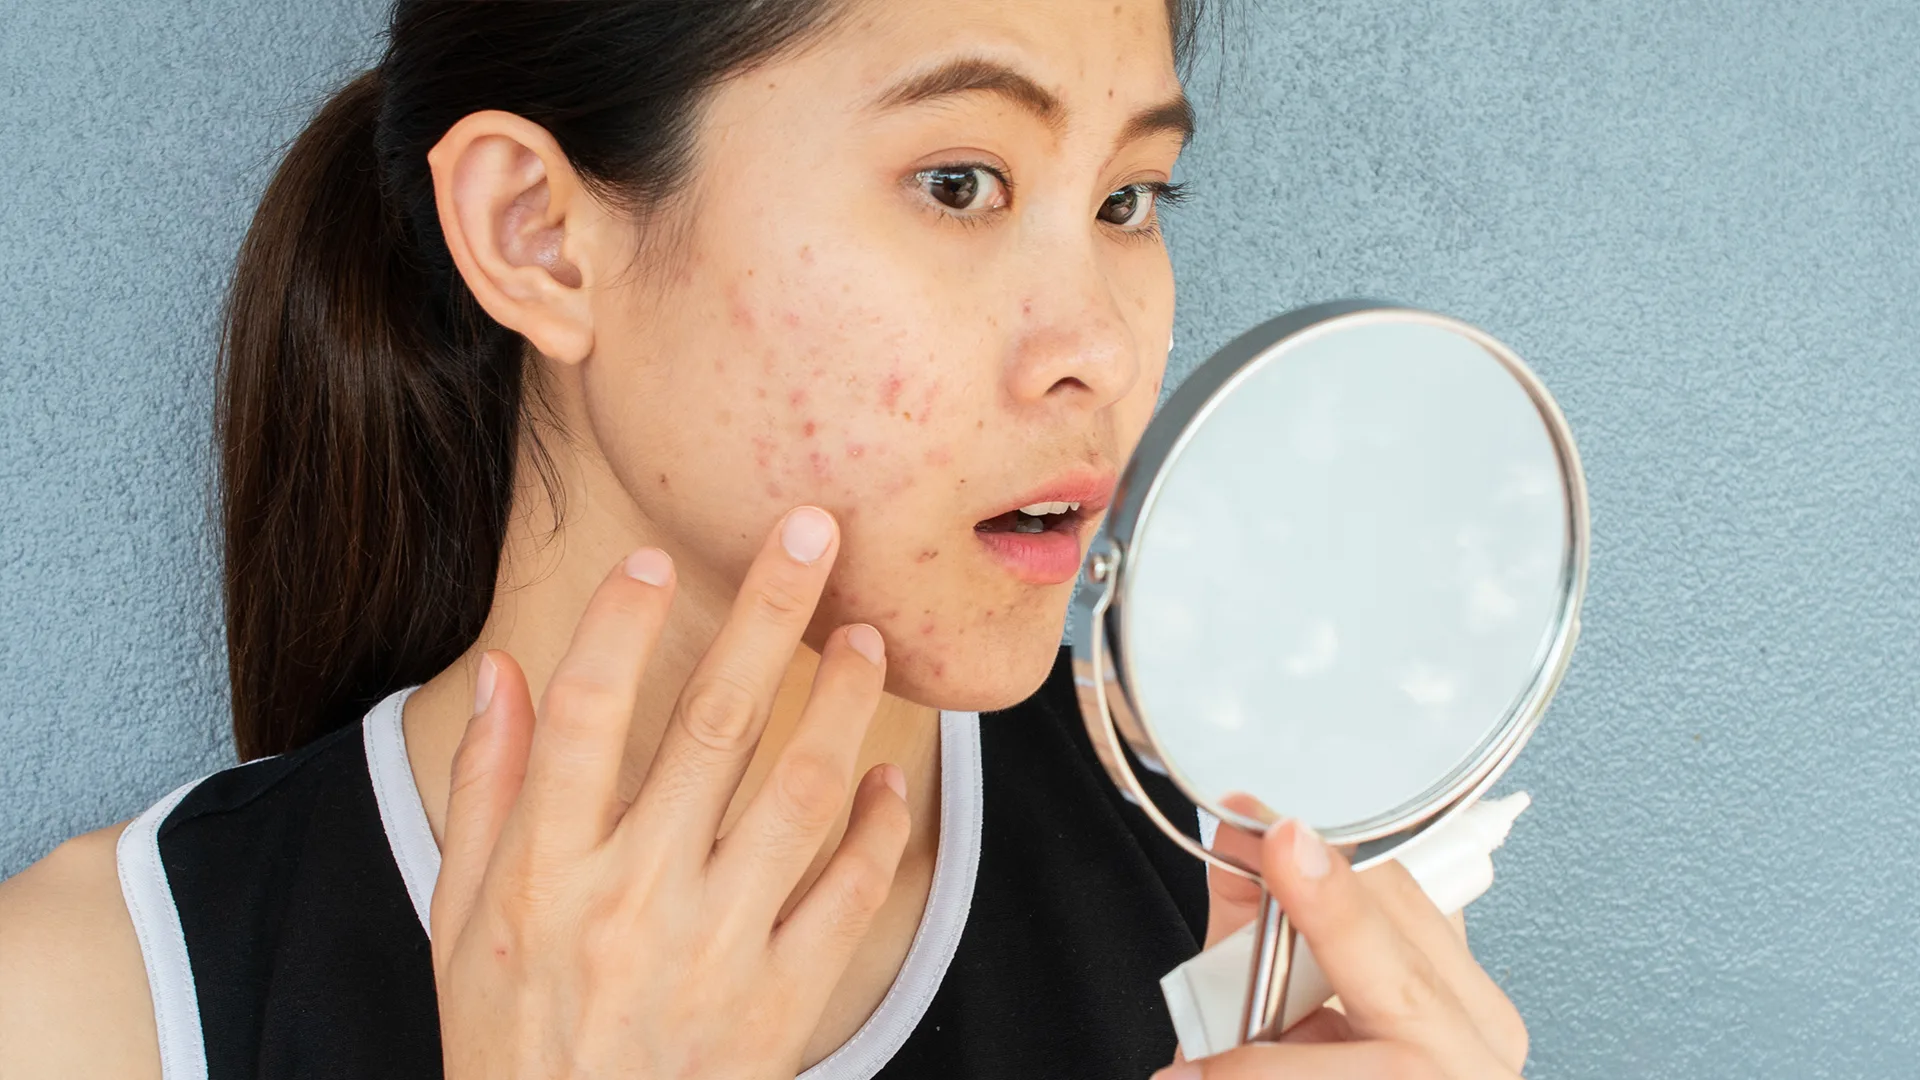 I struggle with post-acne spots – my $10.90 buy faded them in a month, I don’t recognize myself in the mirror anymore